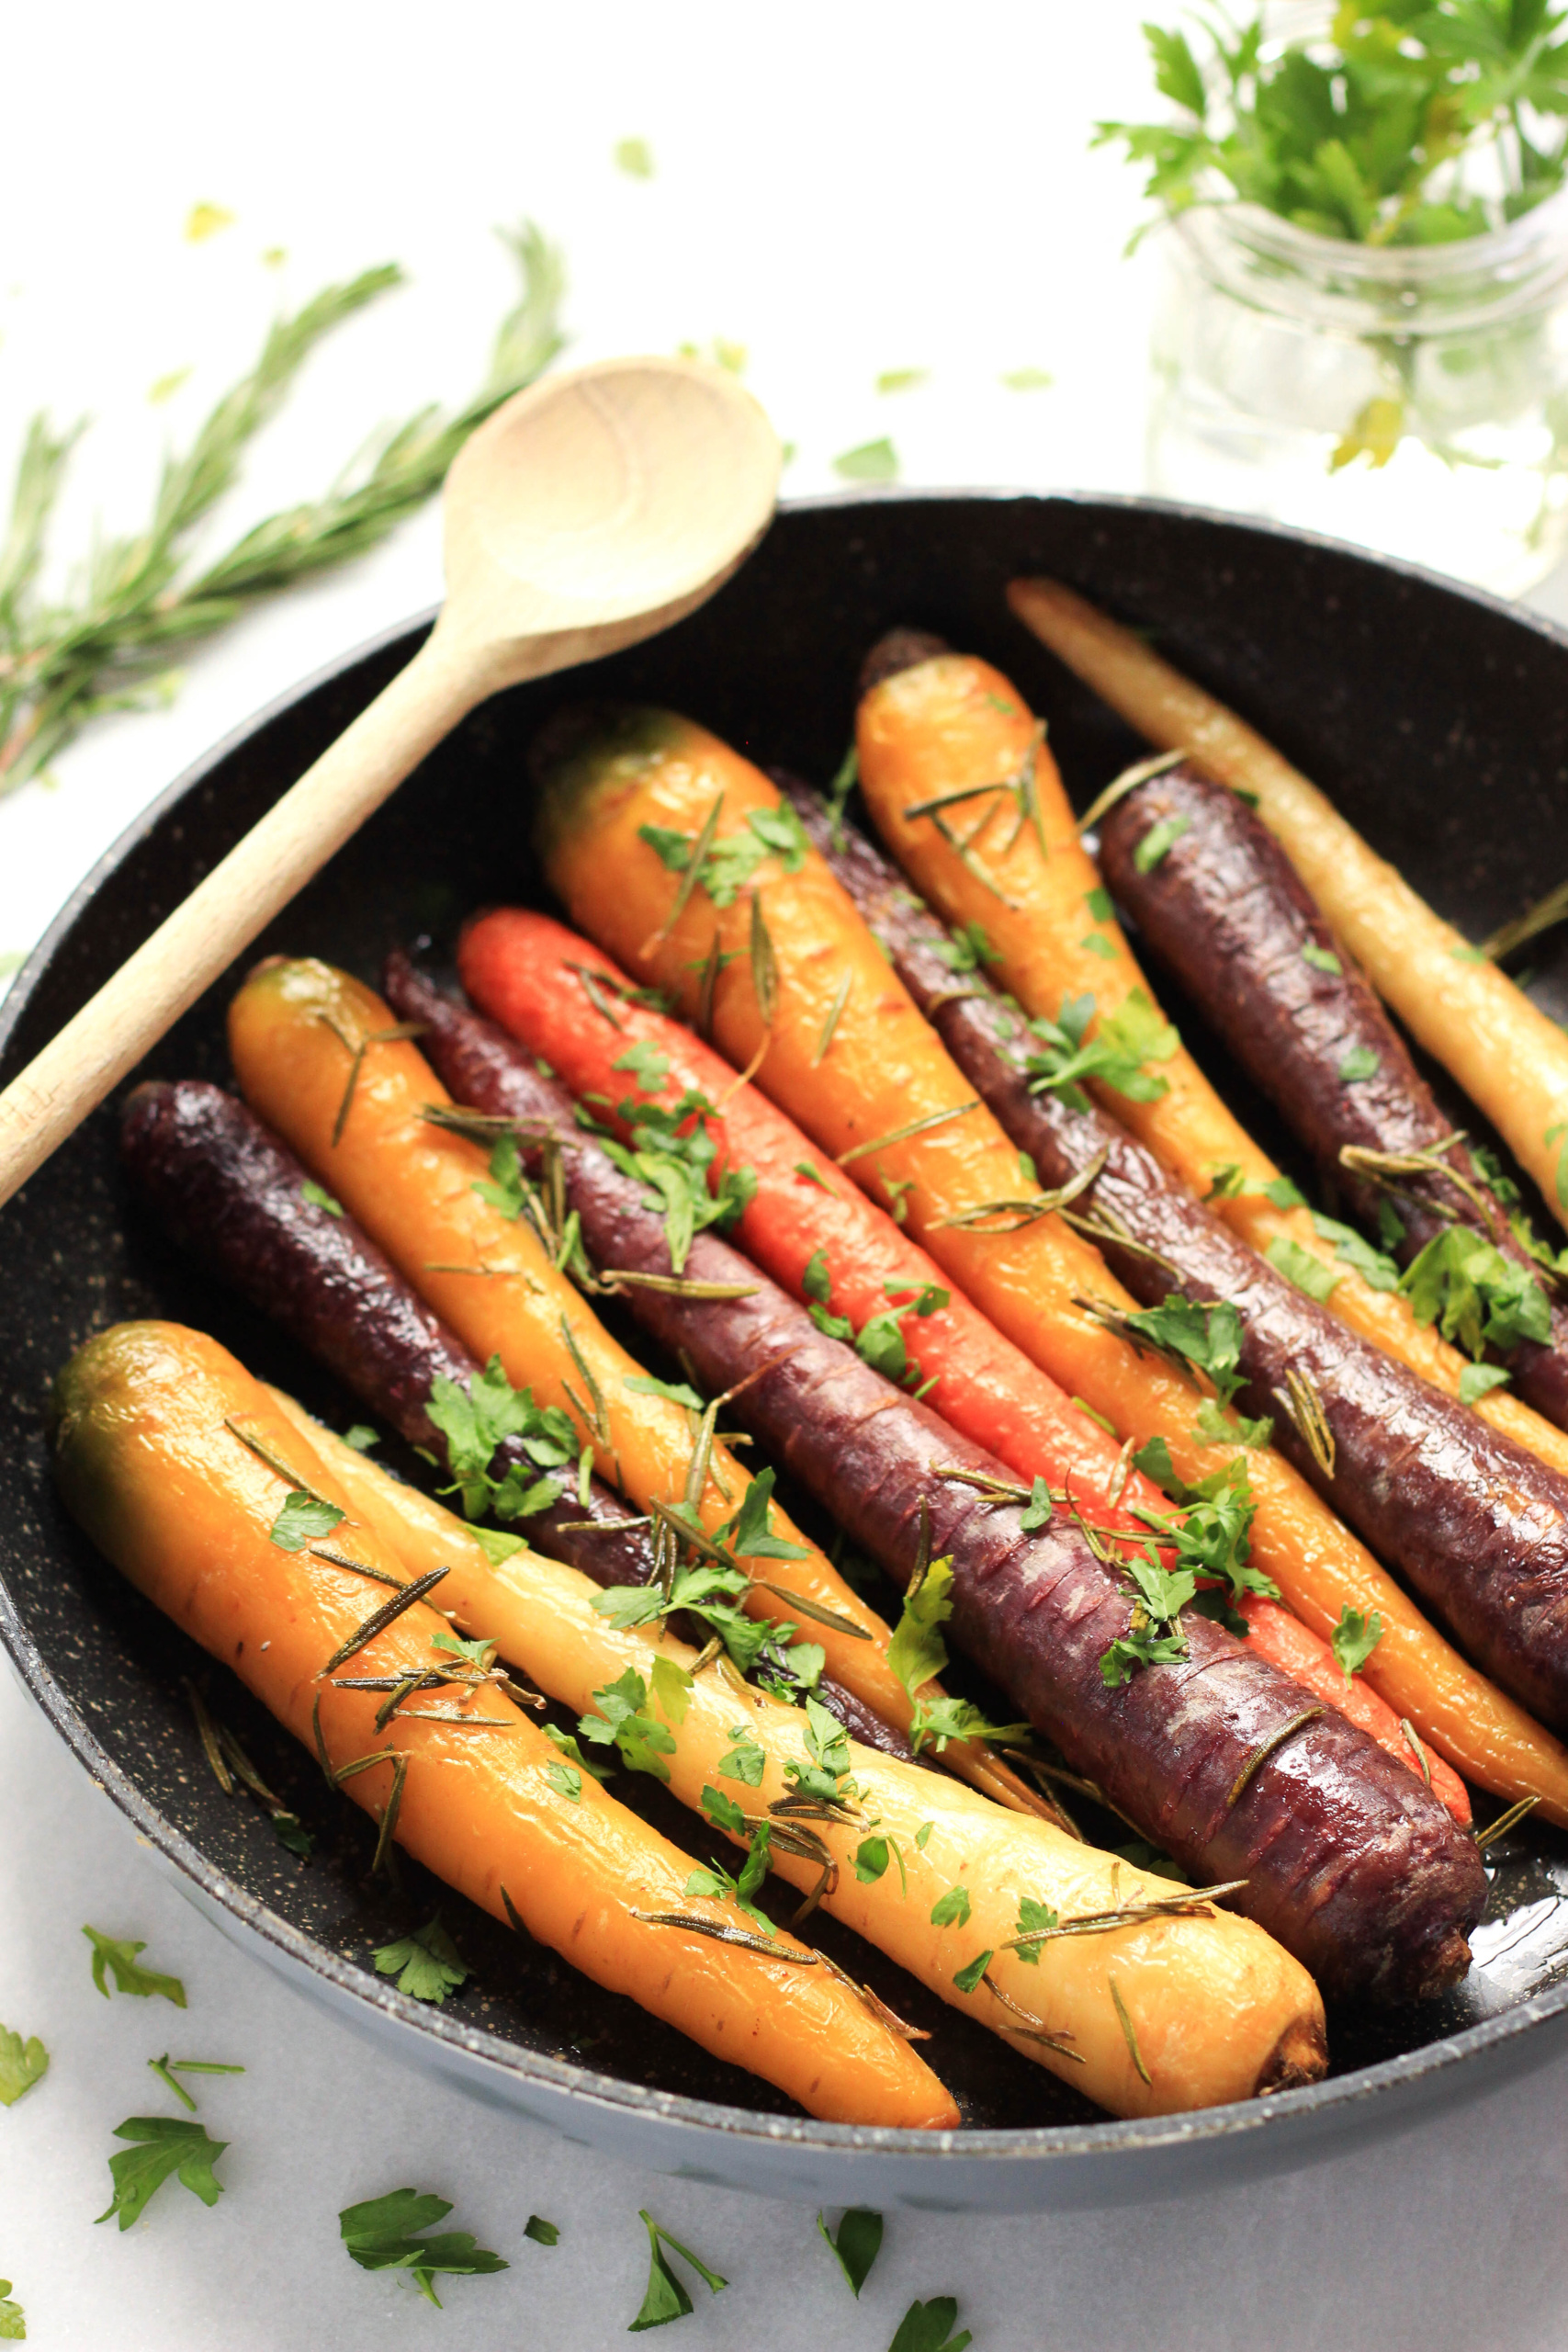 A skillet filled with roasted rainbow carrots.